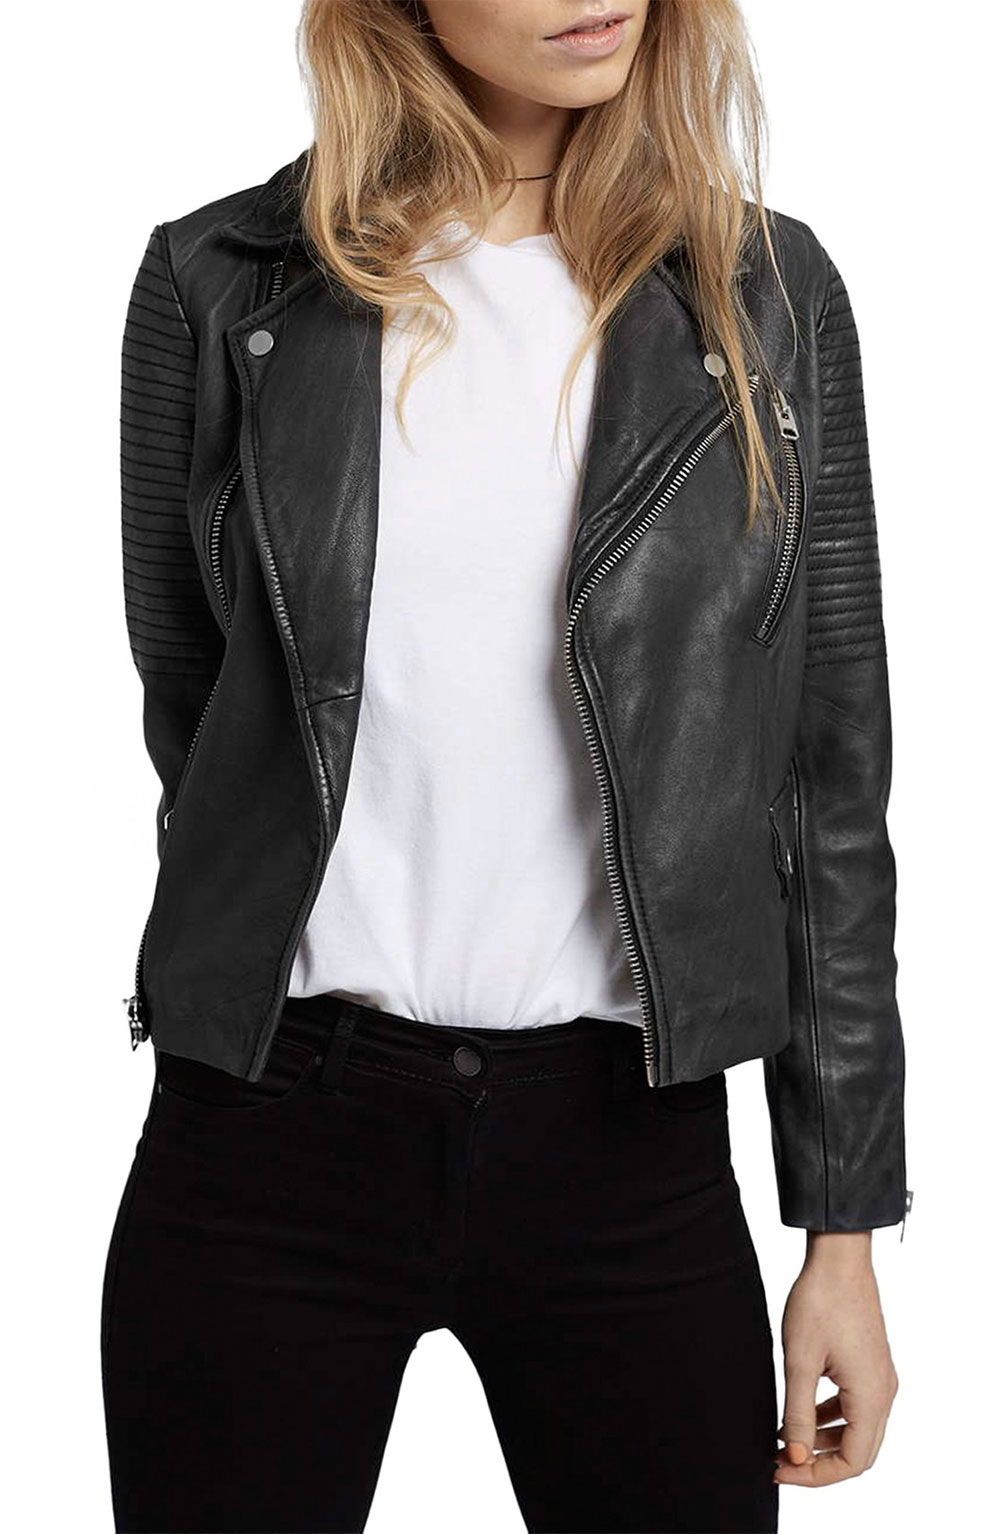 leather jacket daily outfit